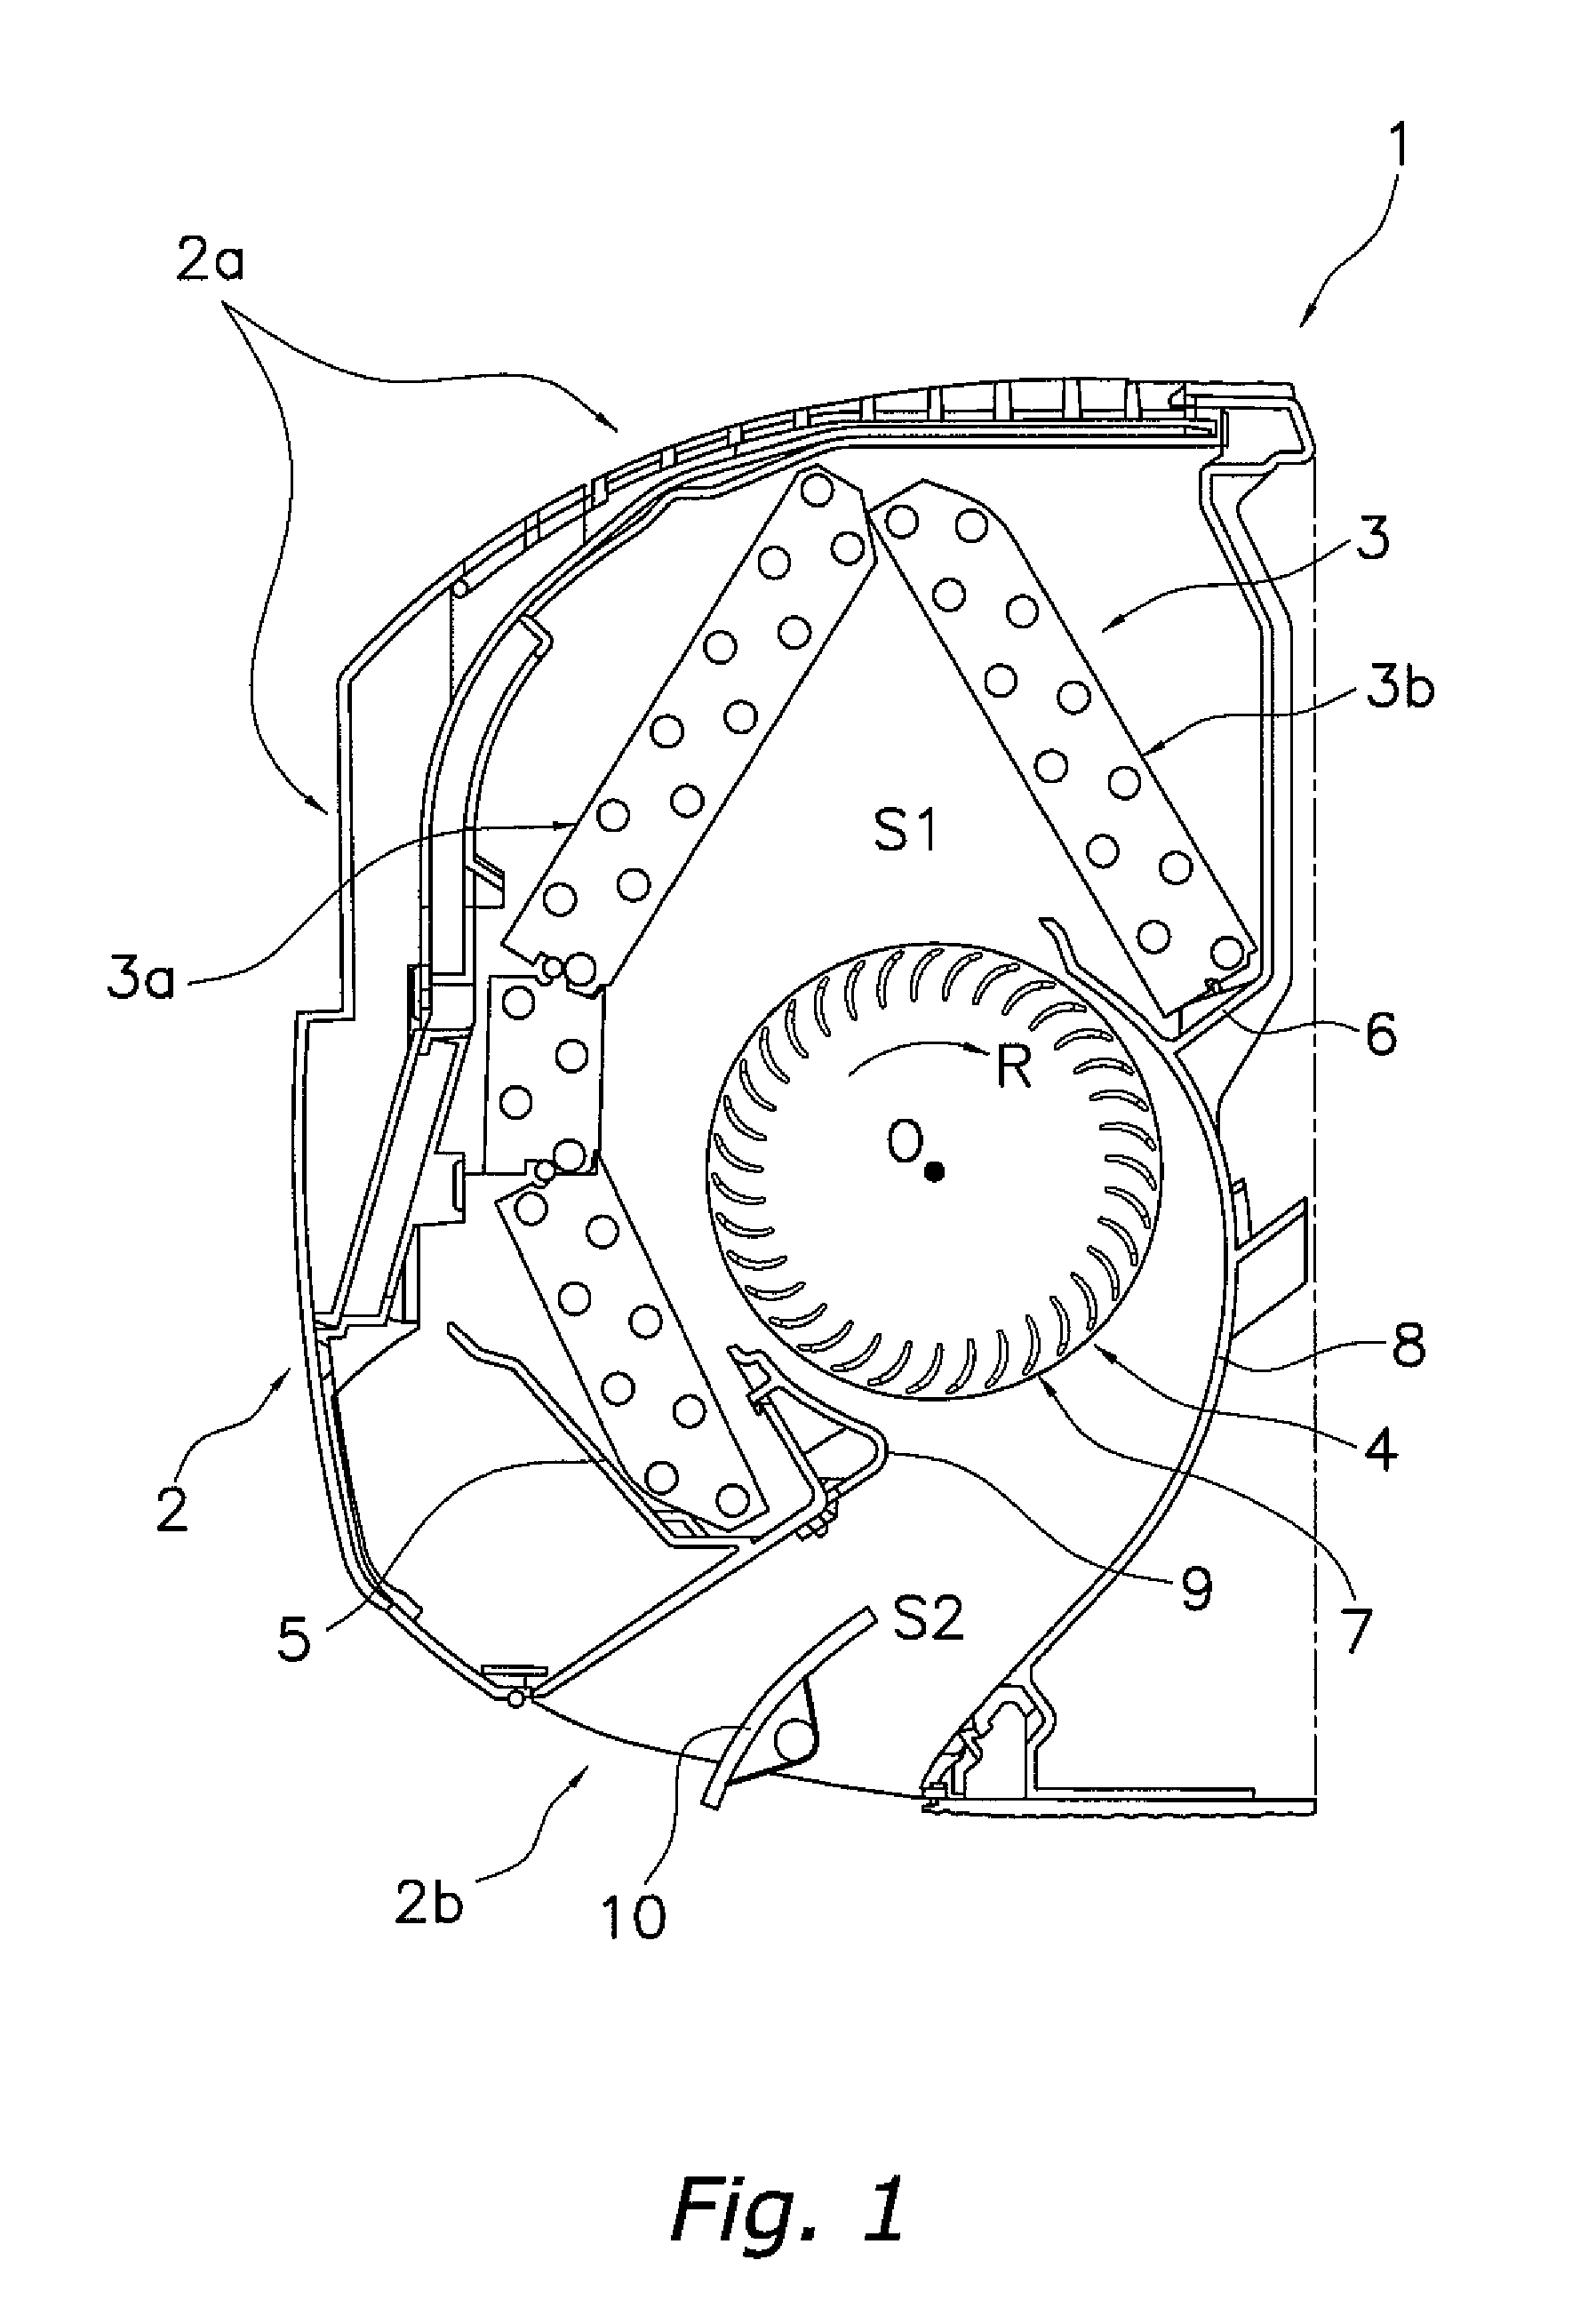 Impeller of multiblade blower and method of manufacuturing the same